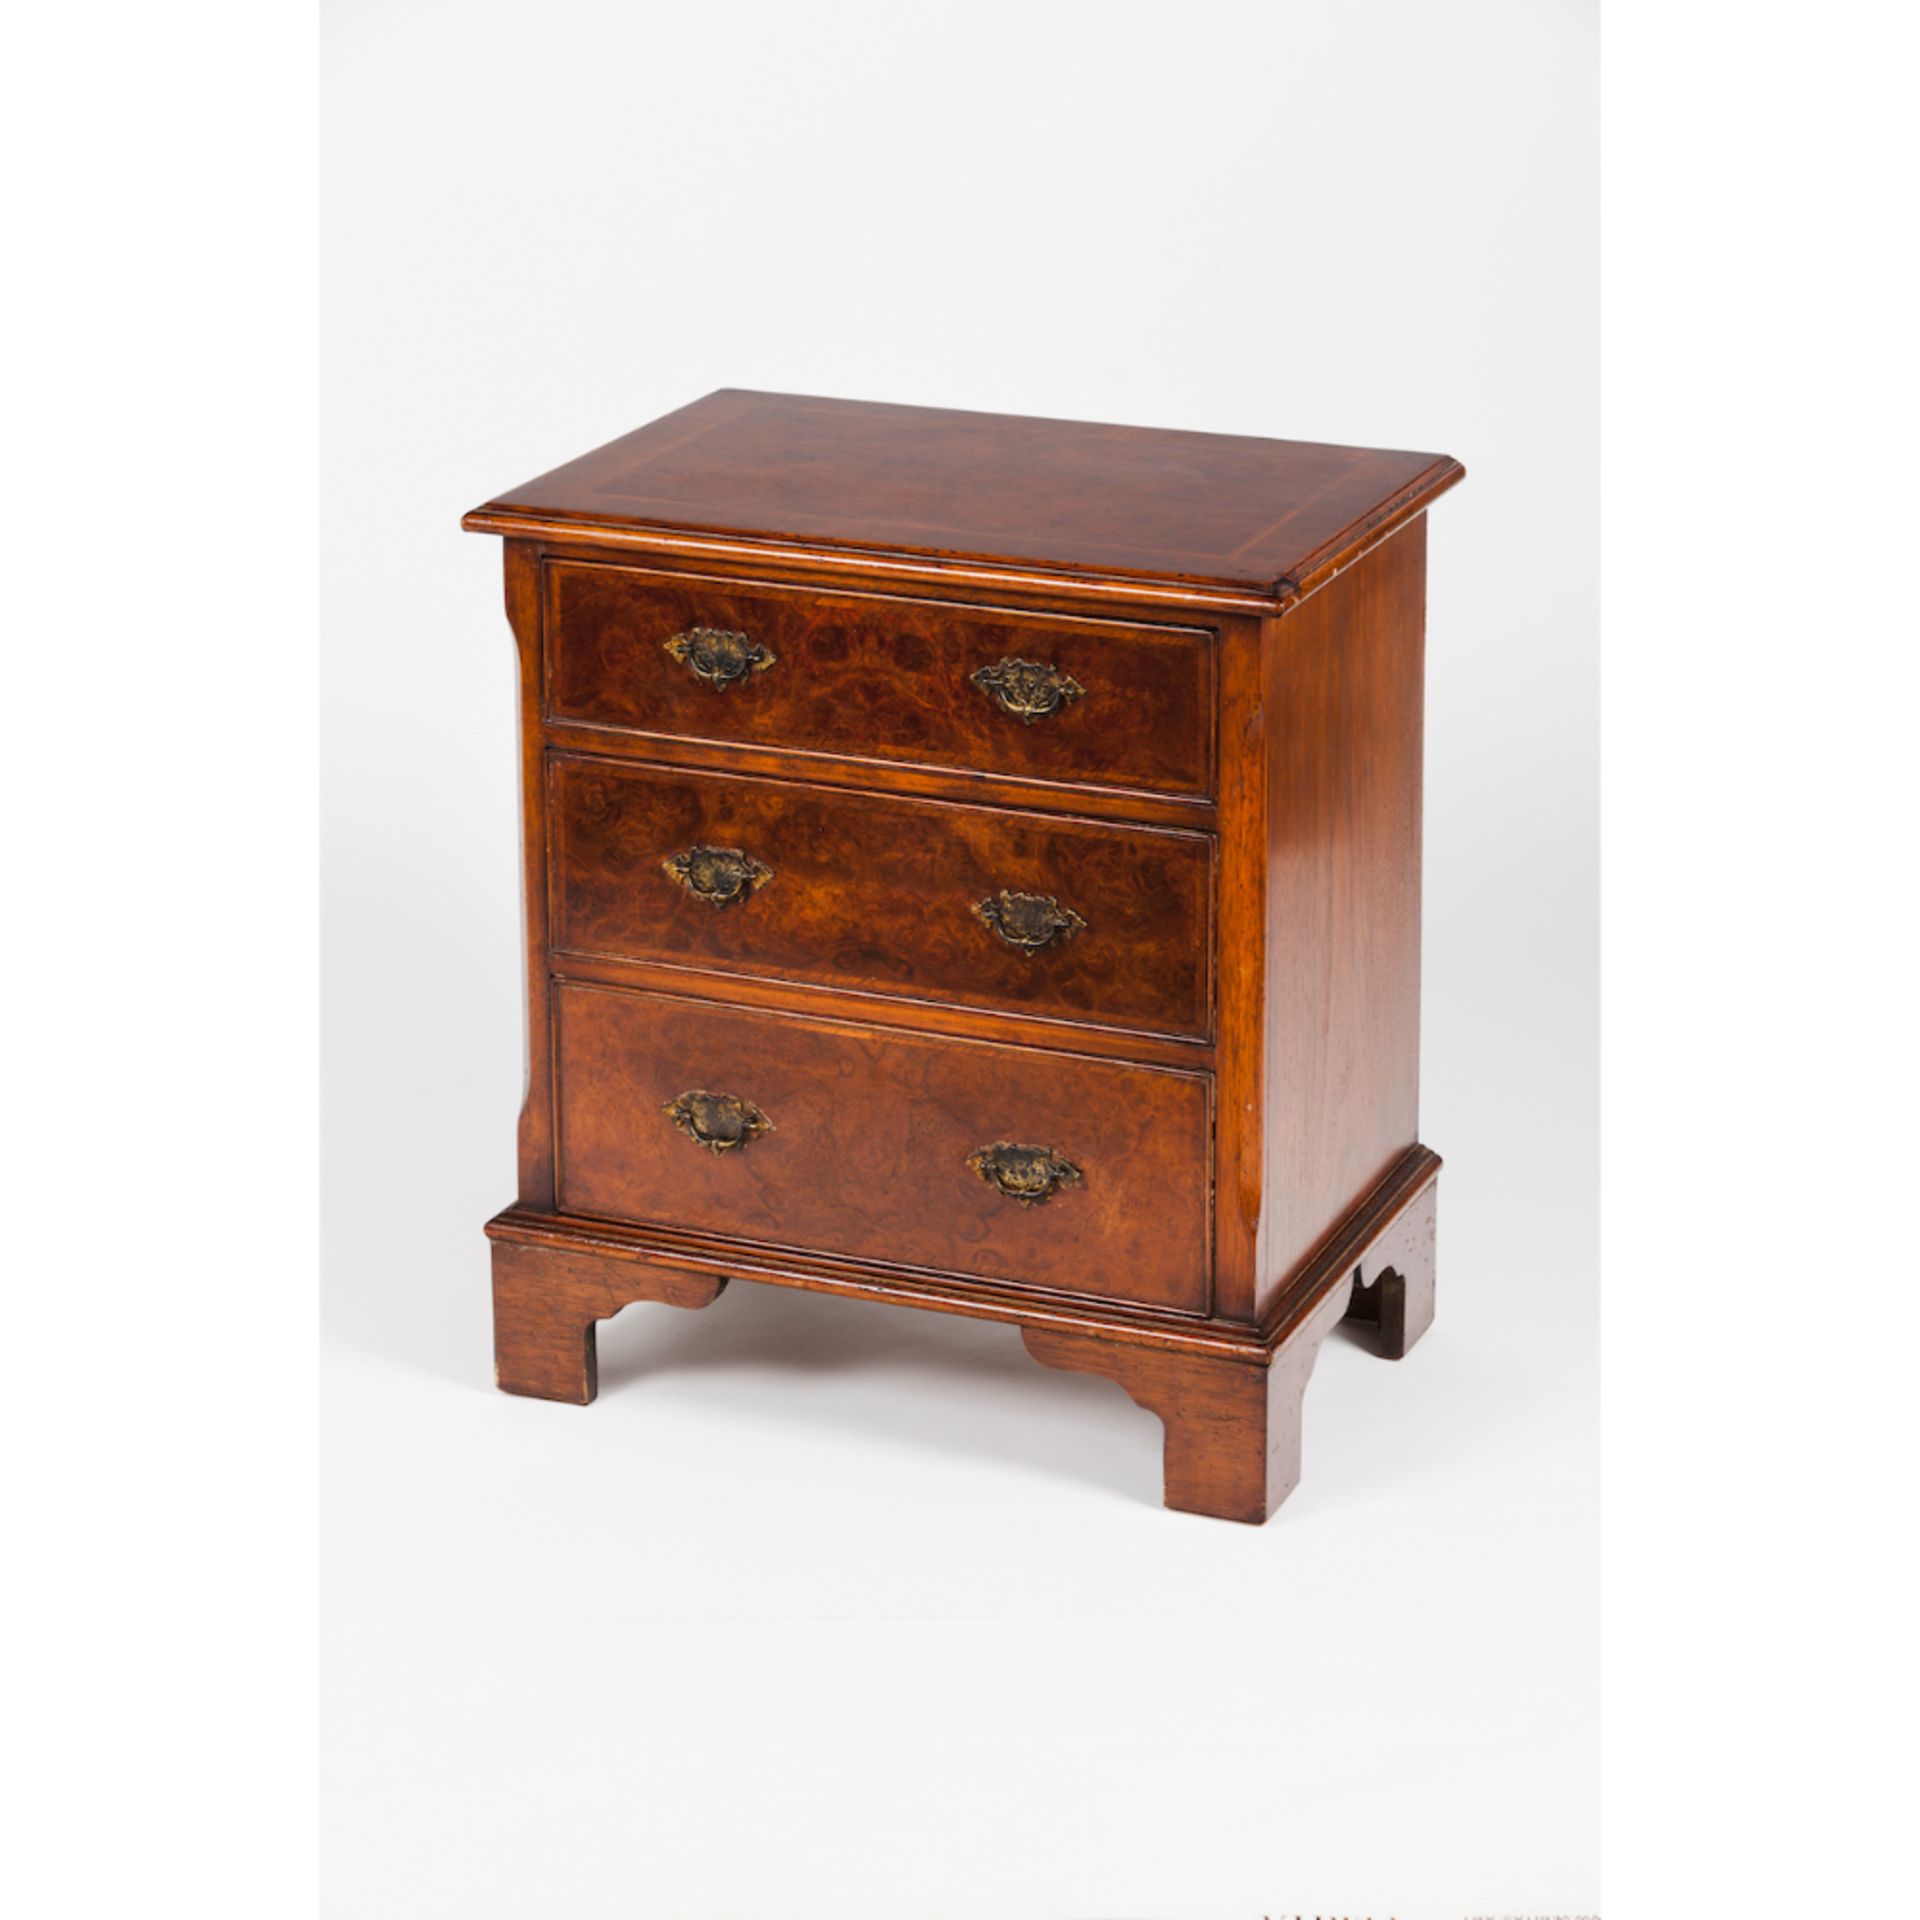 A small George III style chest of drawersMahogany Burr walnut veneer Three drawers and metal